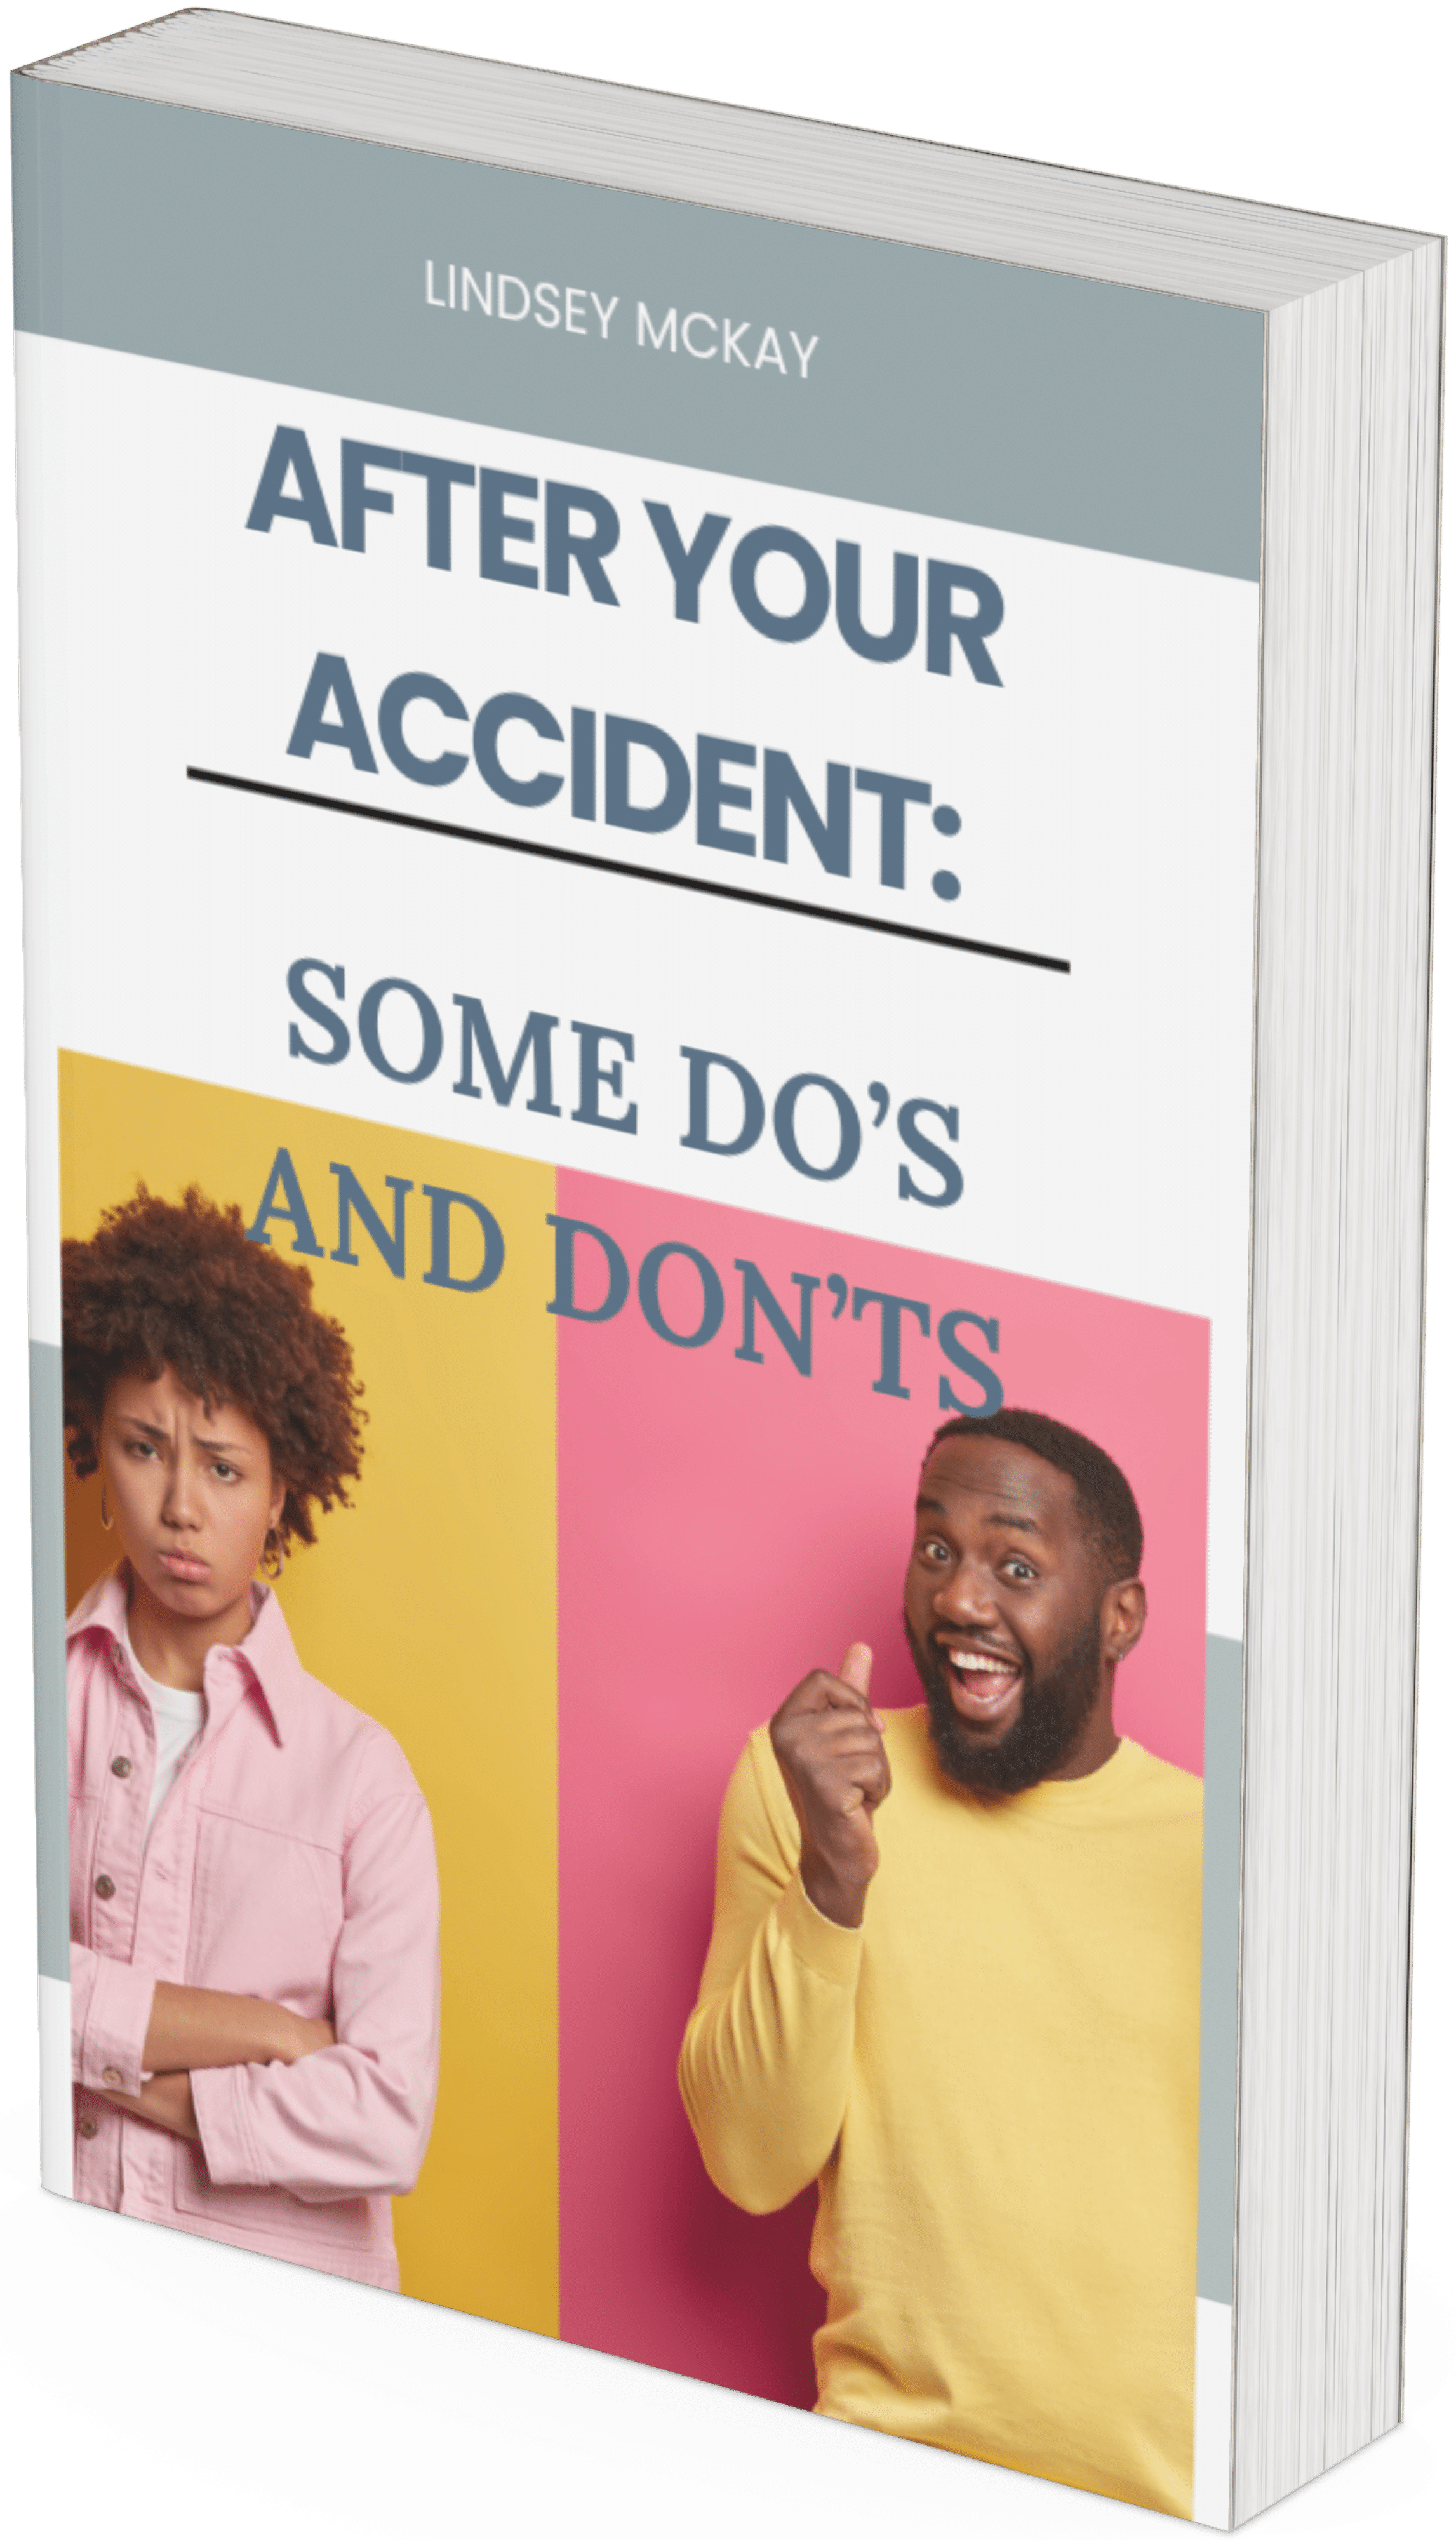 After Your Accident: Some Do’s and Don’ts​